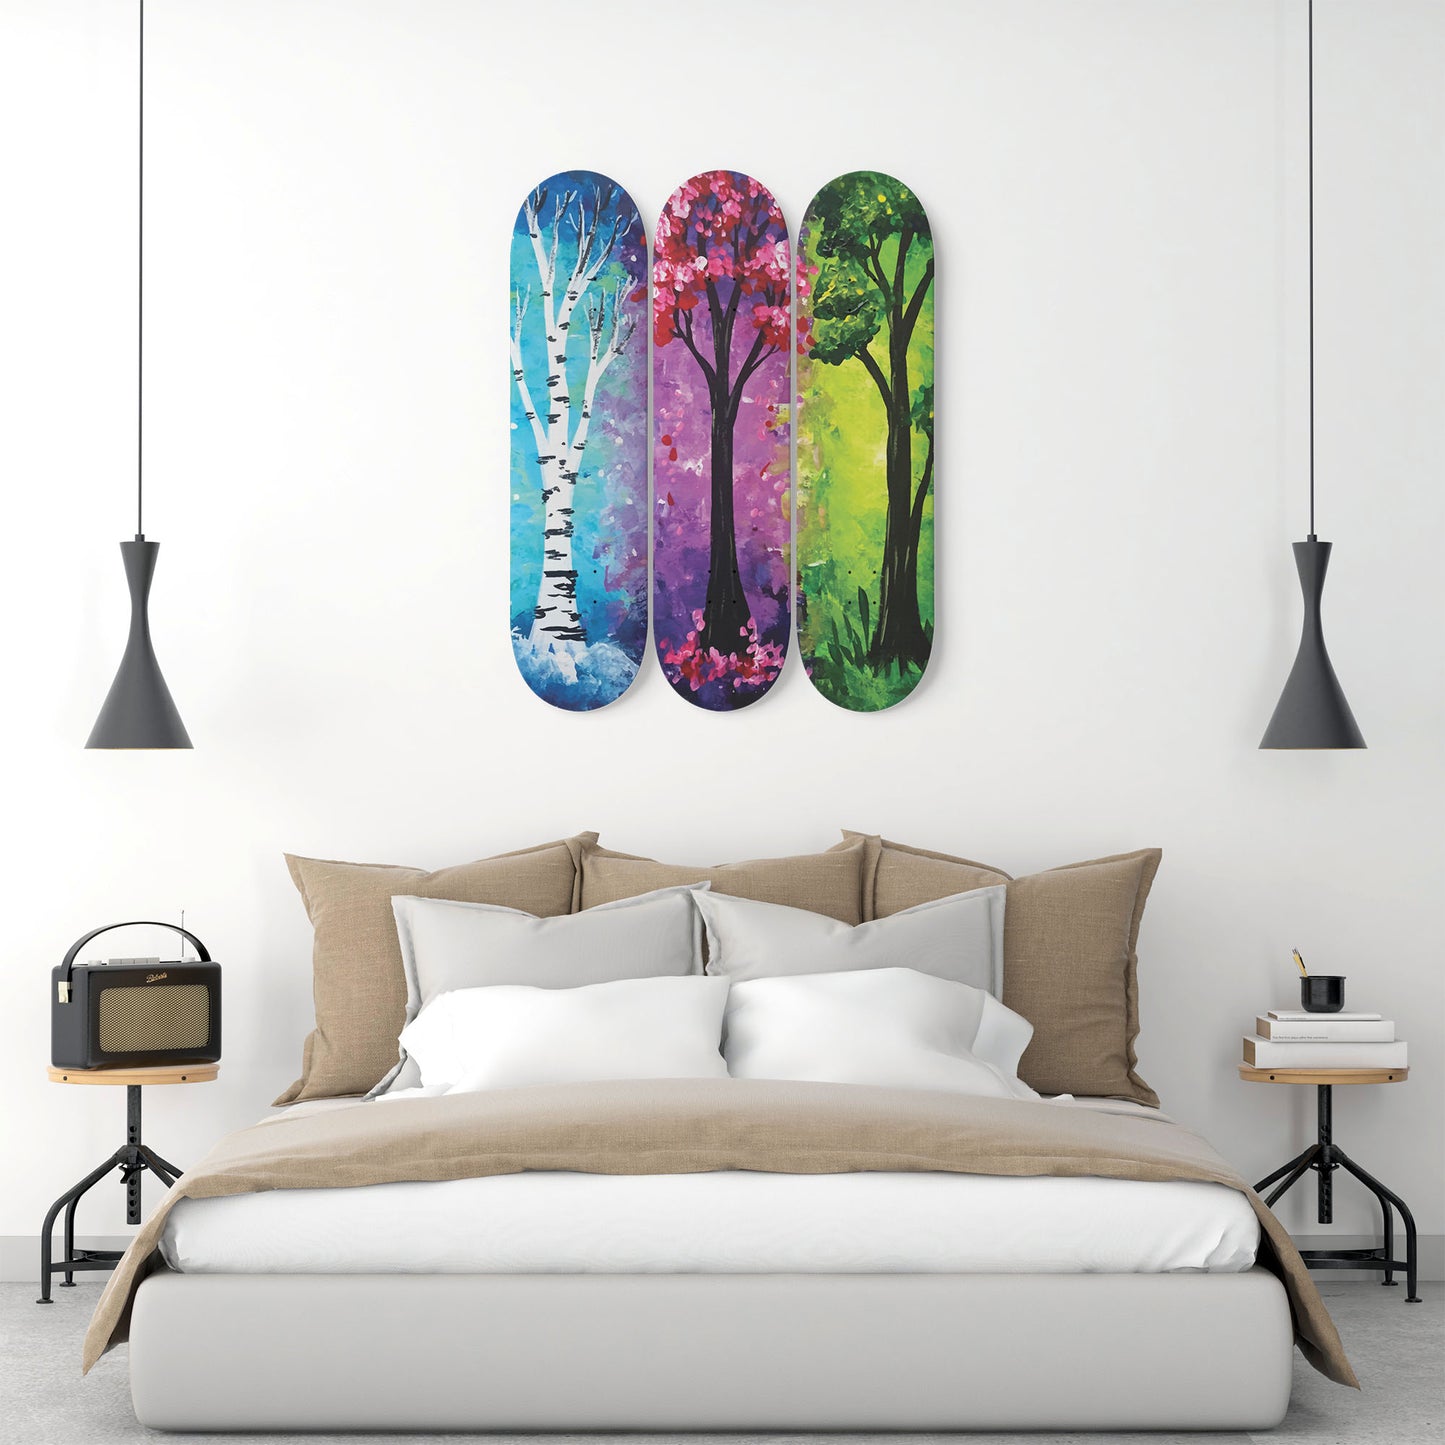 Random Colorful Artwork 9 -  | Skateboard Deck Wall Art, Wall Hanged Room Decoration, Maple Wood, Accent Gift for Home, Aesthetic Wall Art